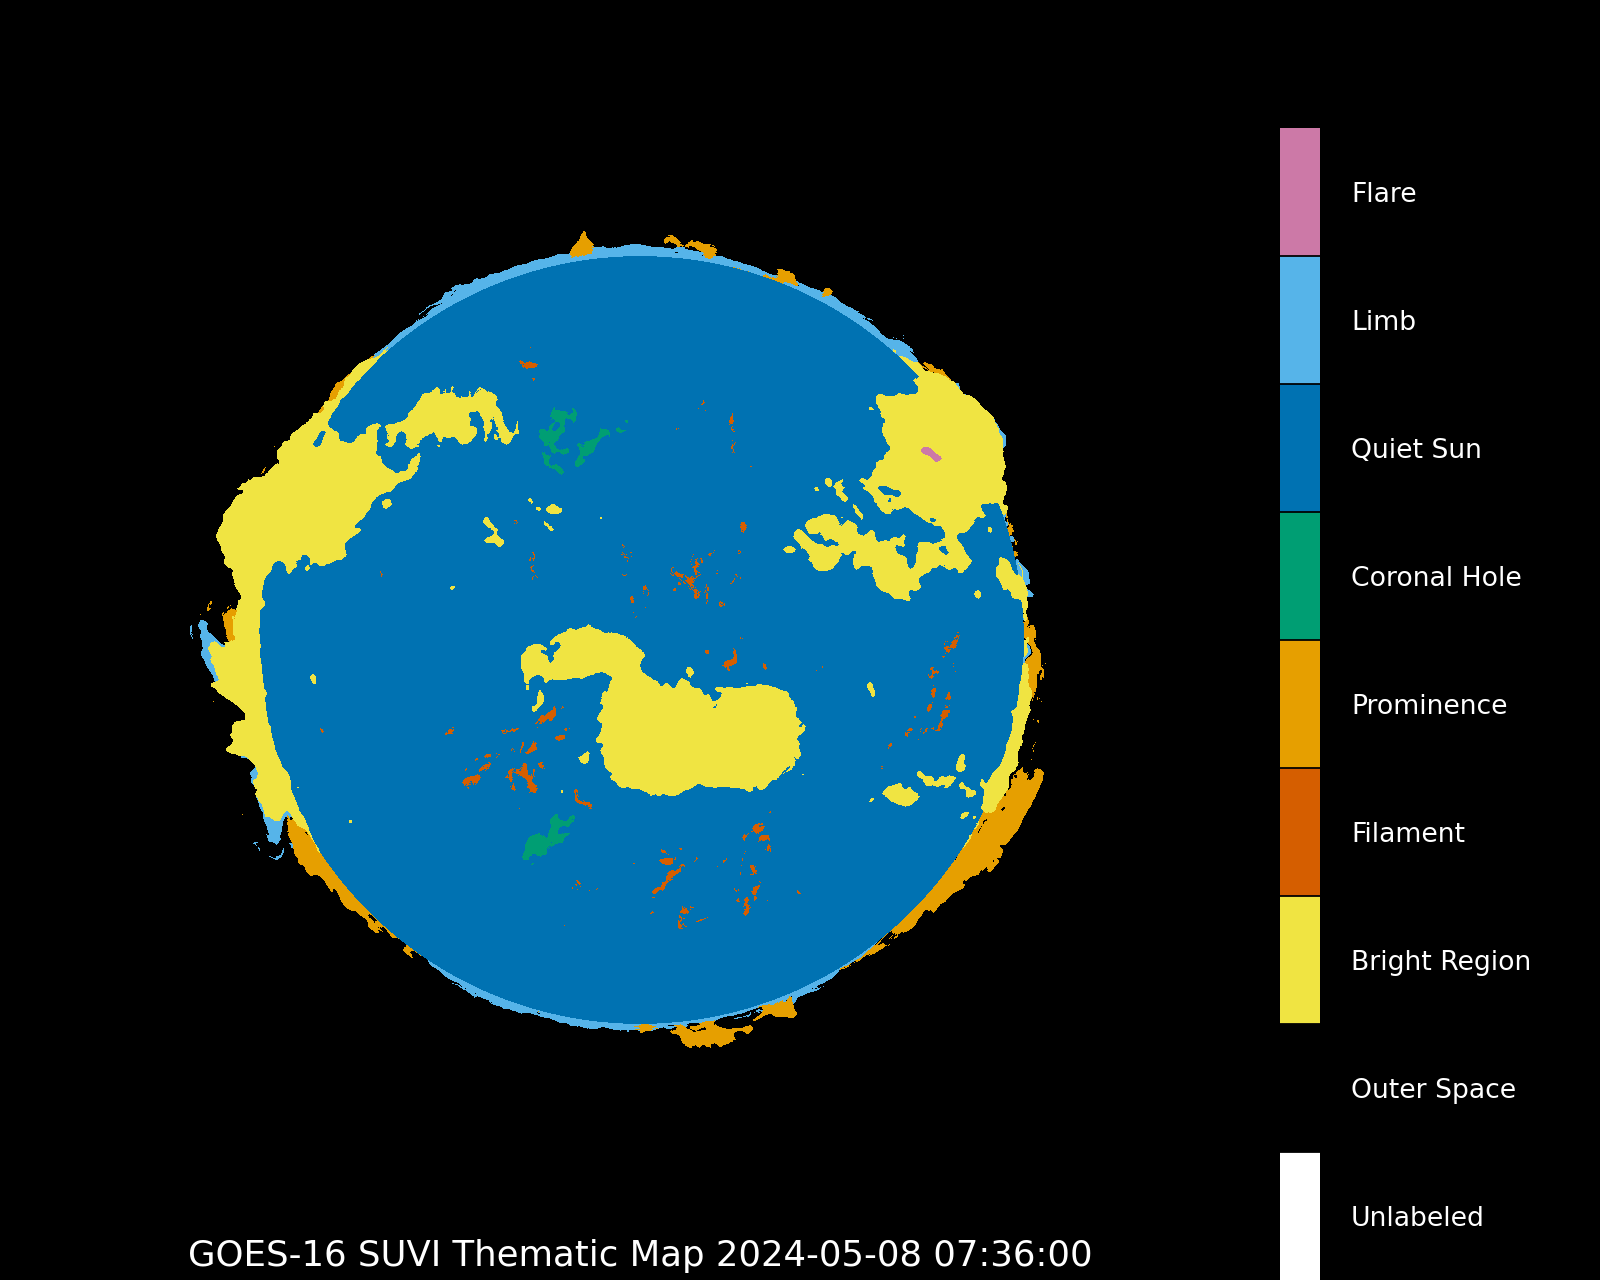 GOES-16 SUVI Thematic Map